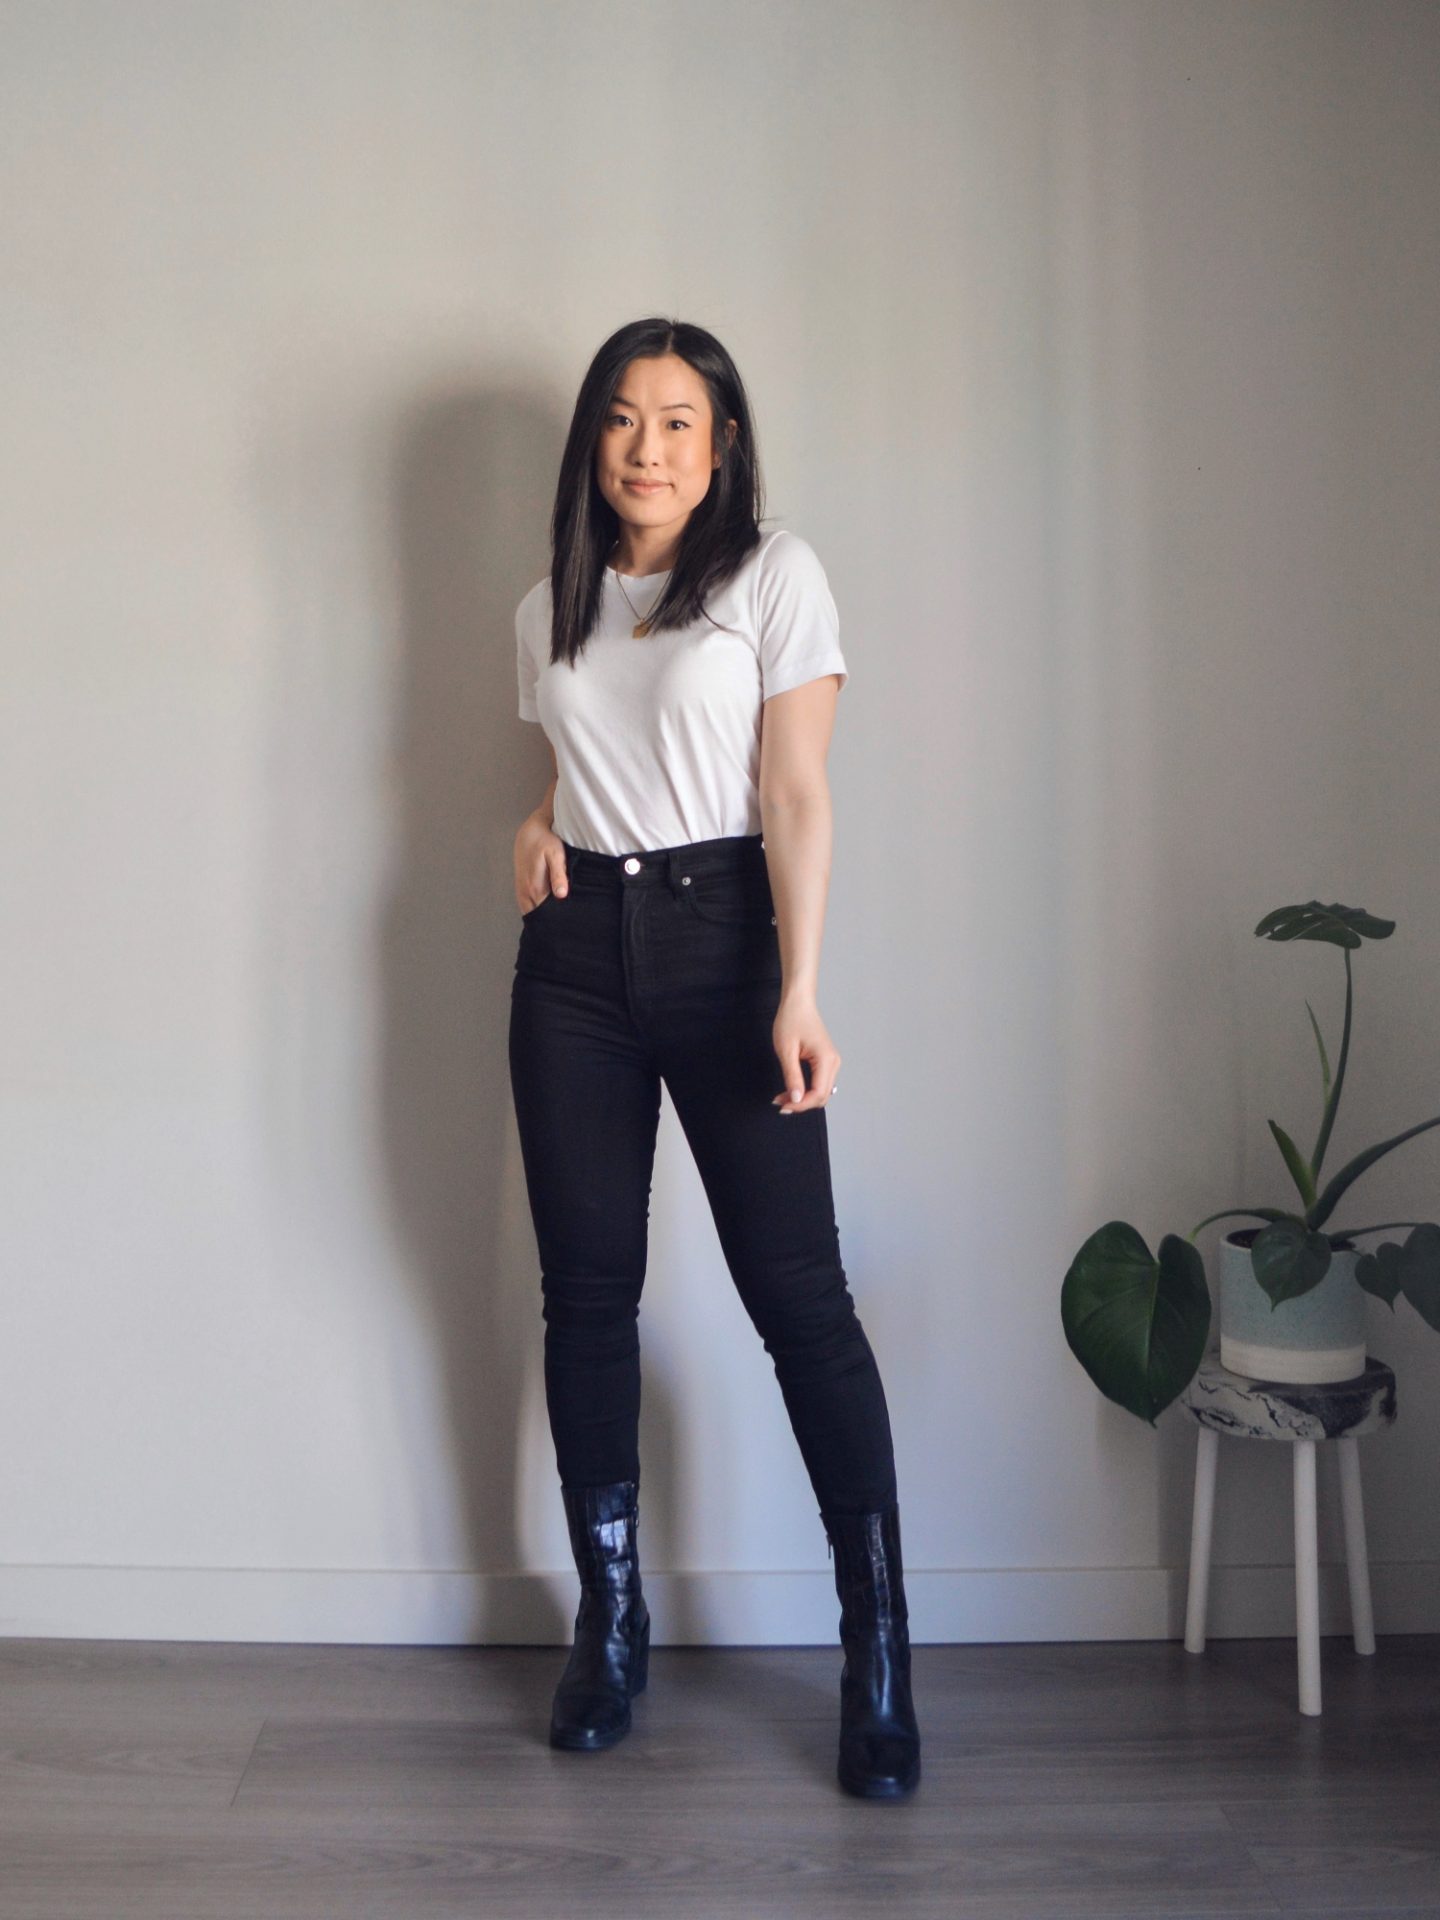 Outfit details: white t-shirt, black skinny jeans, black mid-calf boots